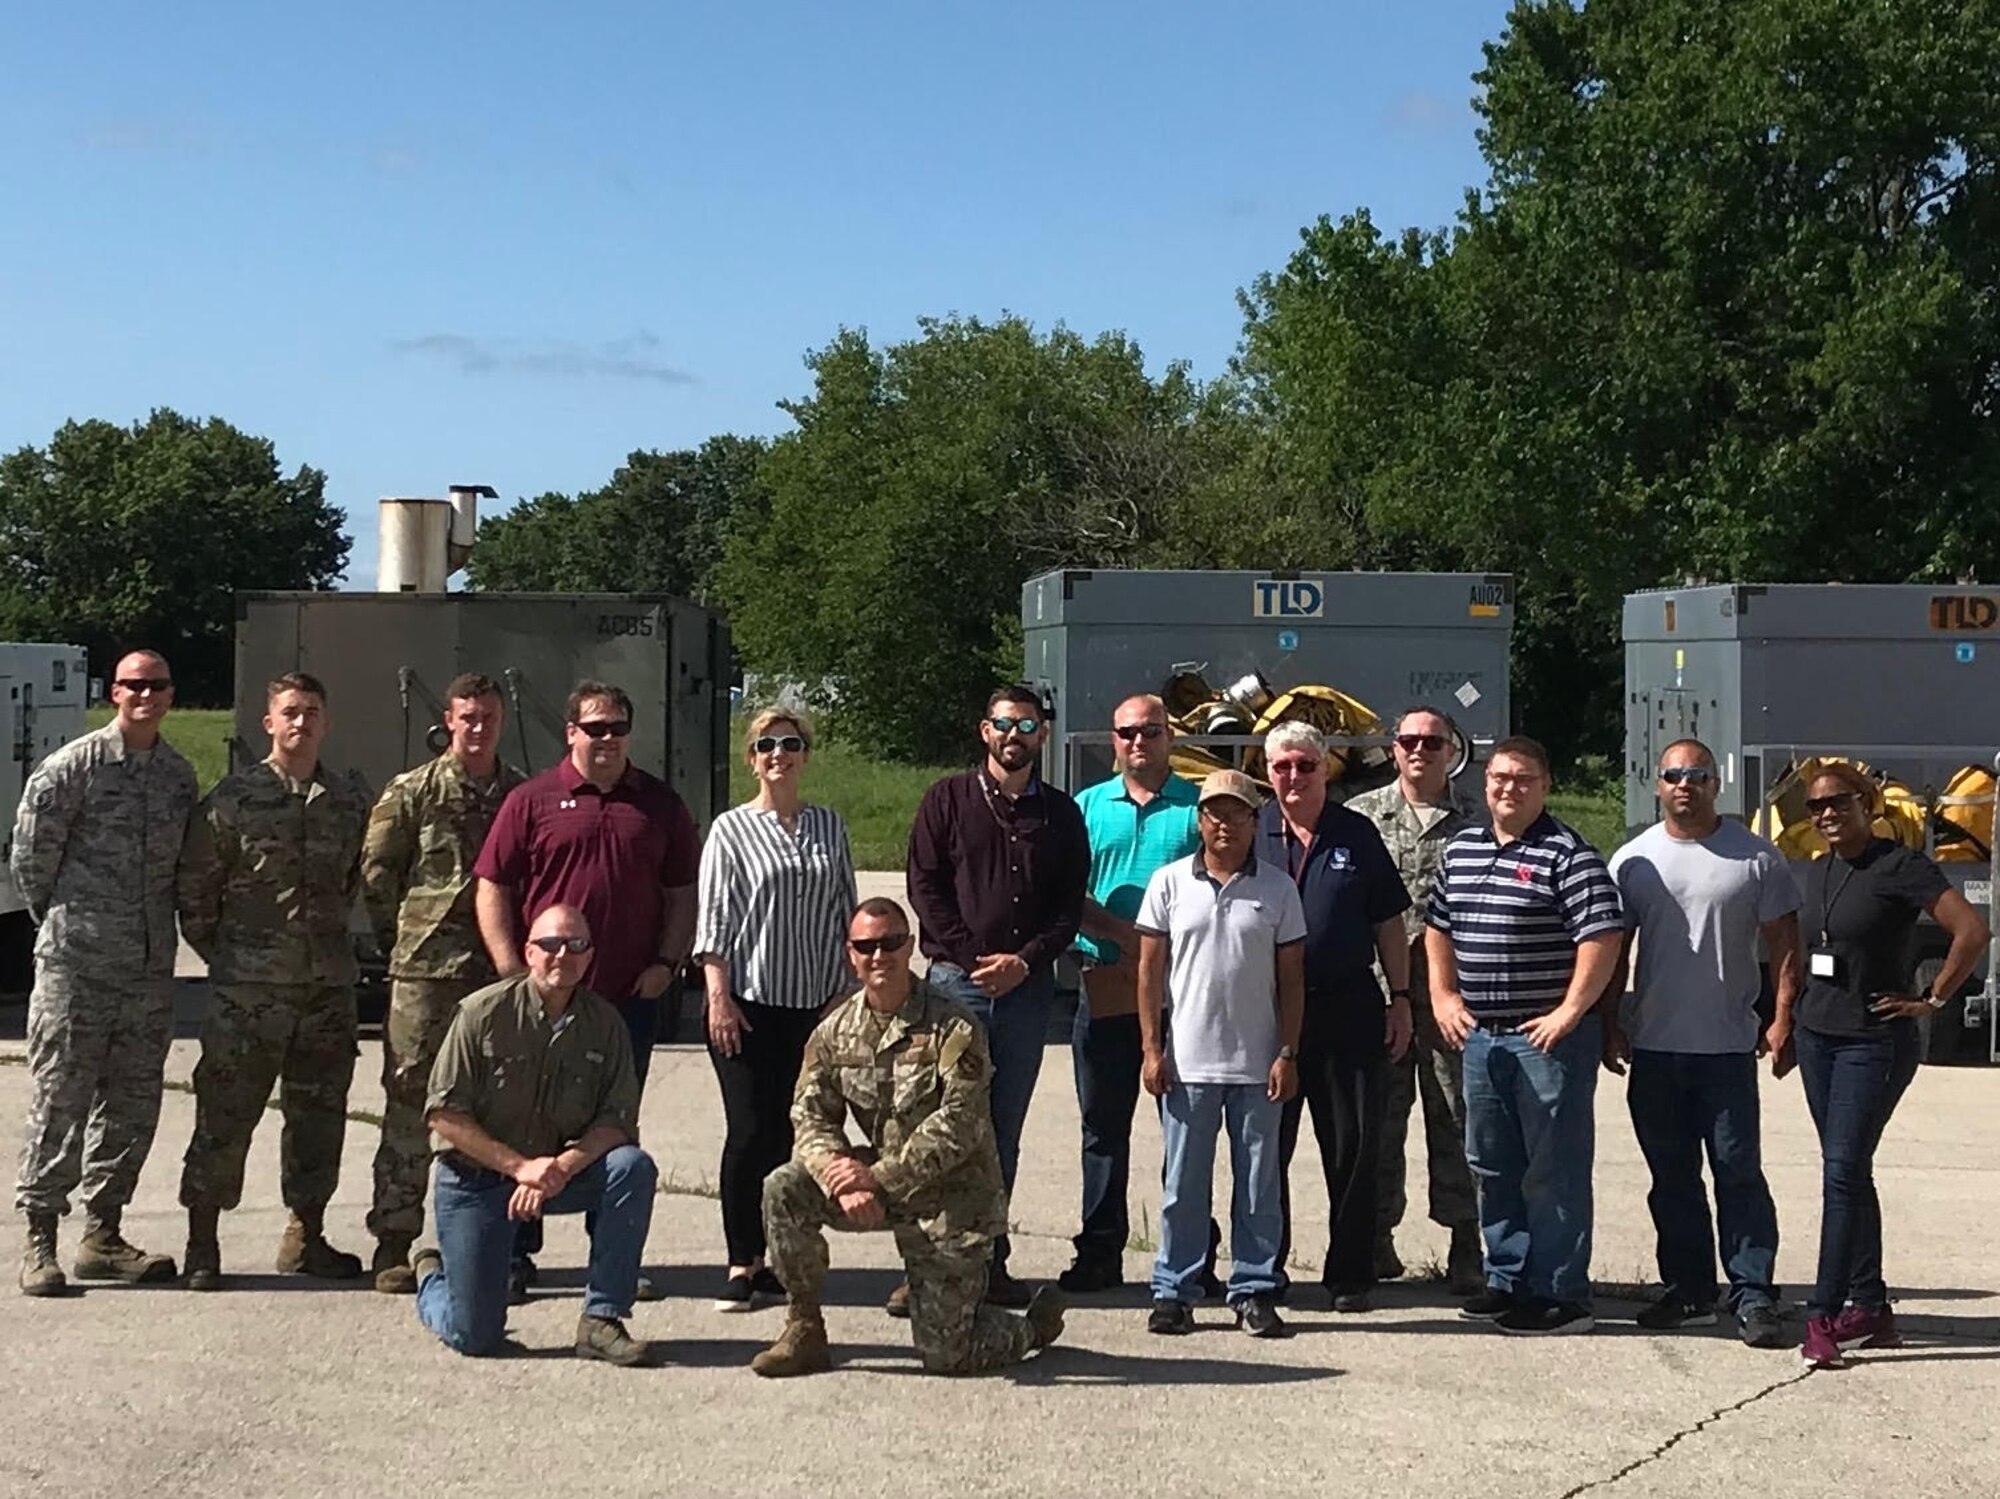 Airmen from the 509th Maintenance Squadron and other Air Force partners from across the country pose for a photo on July 18, 2019. They all served as part of a multi-organizational team that spent a week testing potential HVAC replacement units at Whiteman Air Force Base, Missouri. (Courtesy photo)